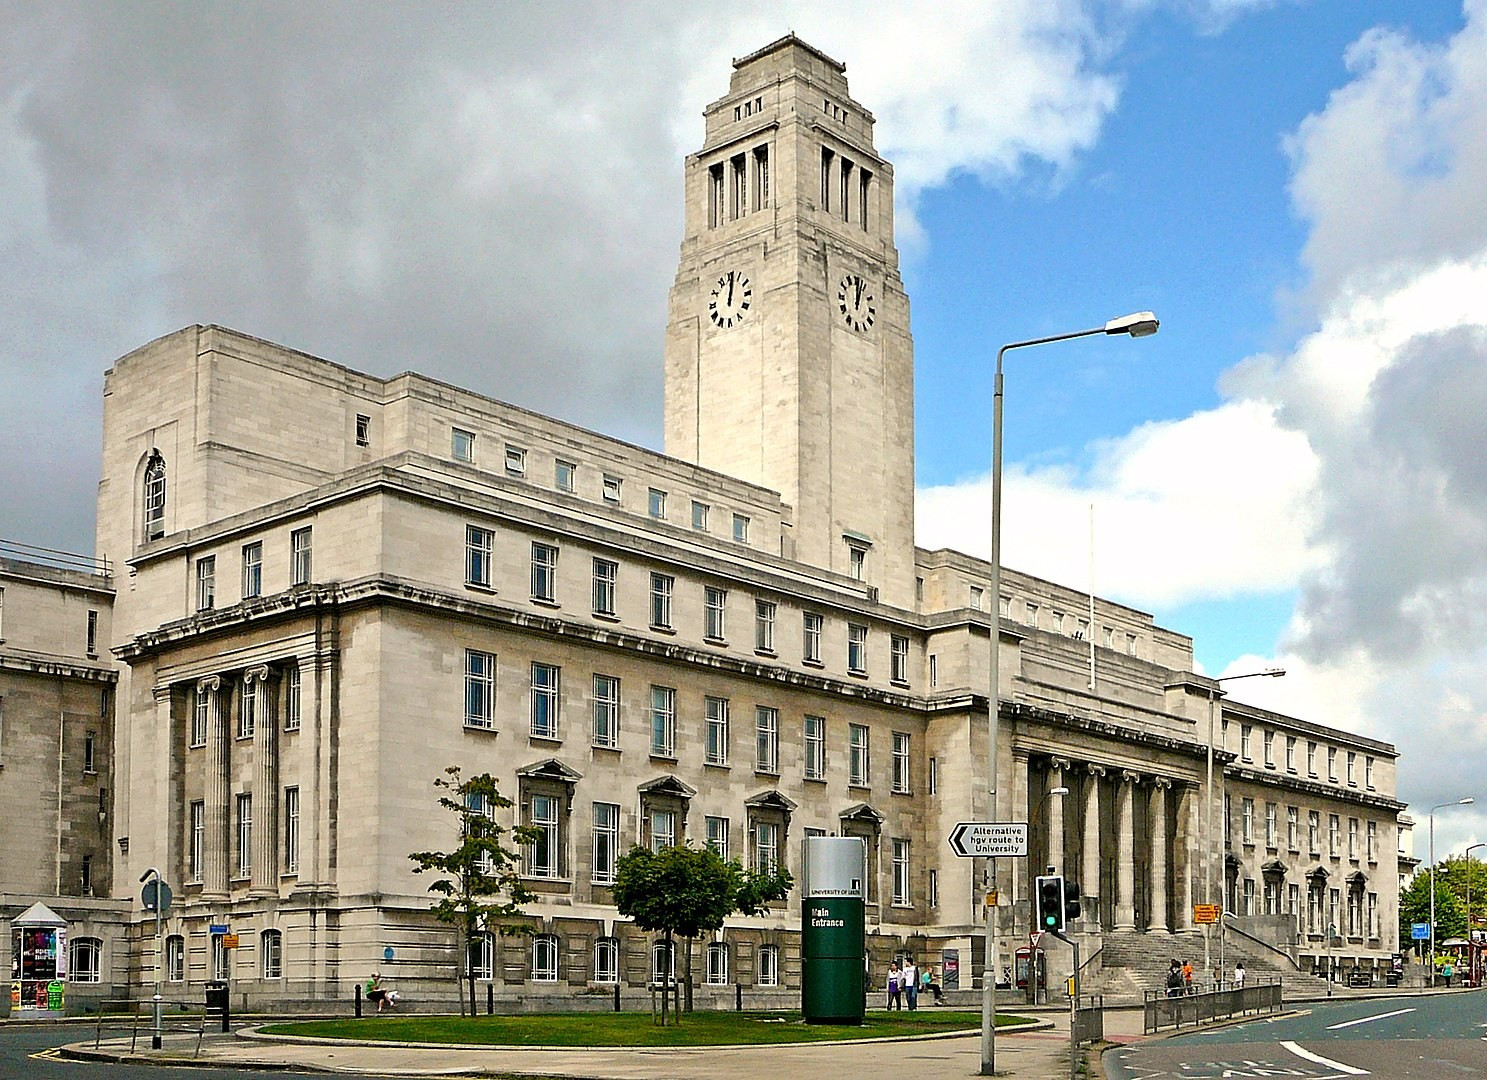 By Tim Green from Bradford - Parkinson Building, Leeds UniversityUploaded by Snowmanradio, CC BY 2.0, https://commons.wikimedia.org/w/index.php?curid=14894691